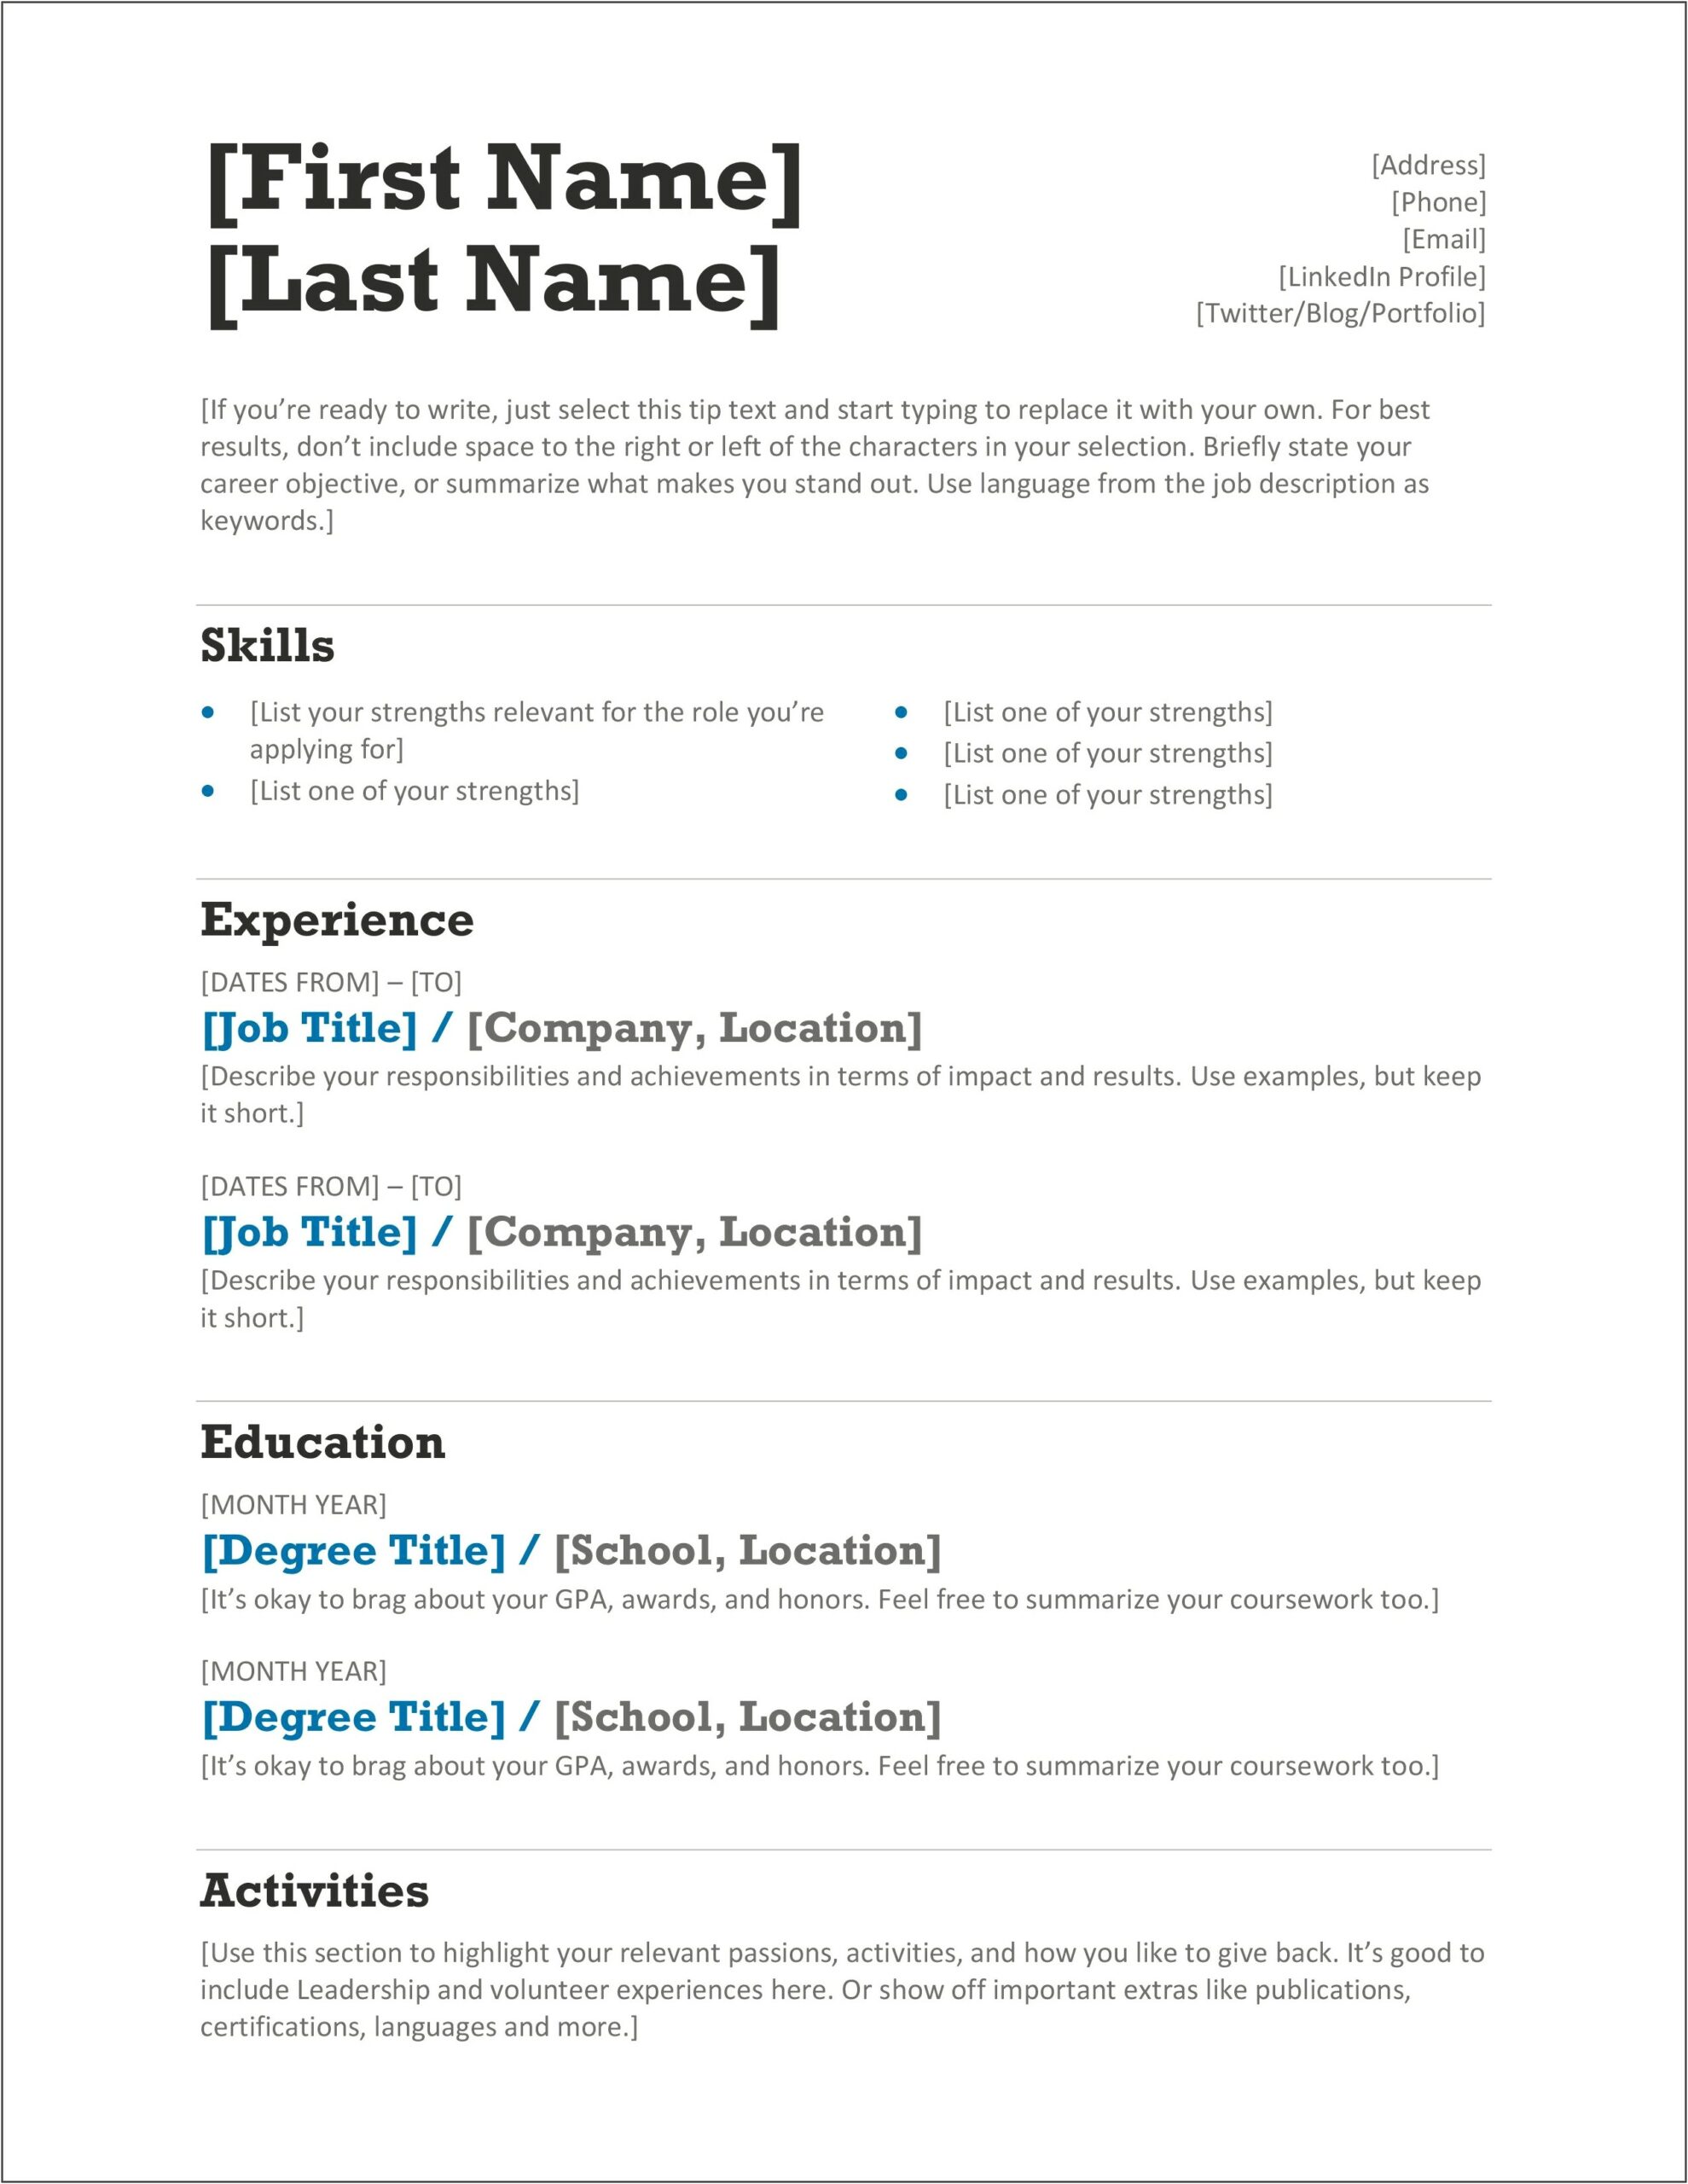 Strengths For A Resume Sample